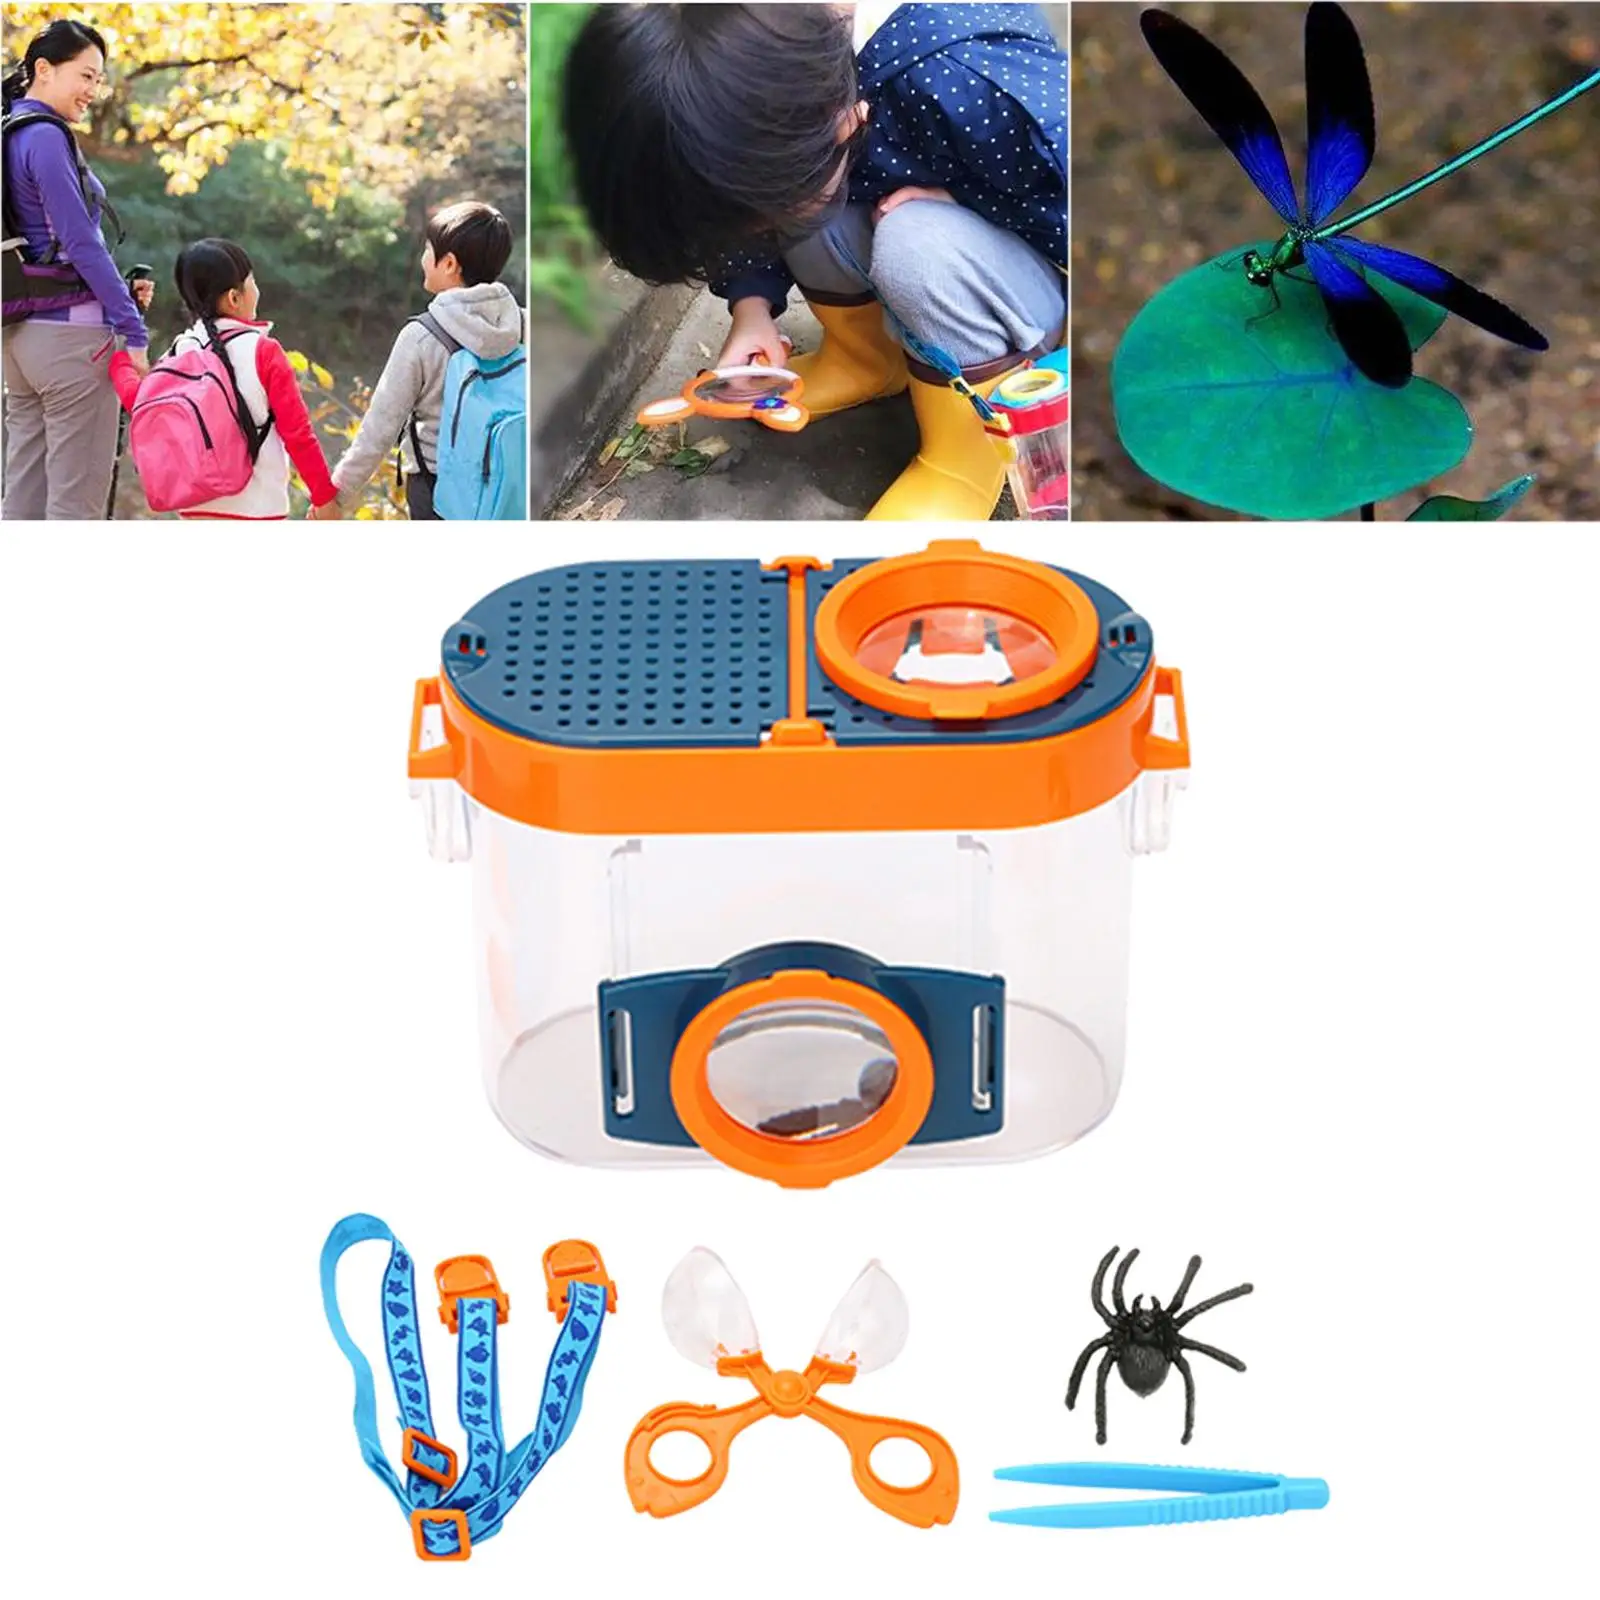  Viewer with Magnify  Backyard Explorer Outdoor Toy   Viewer Magnifying Viewers for Kids Children Educational